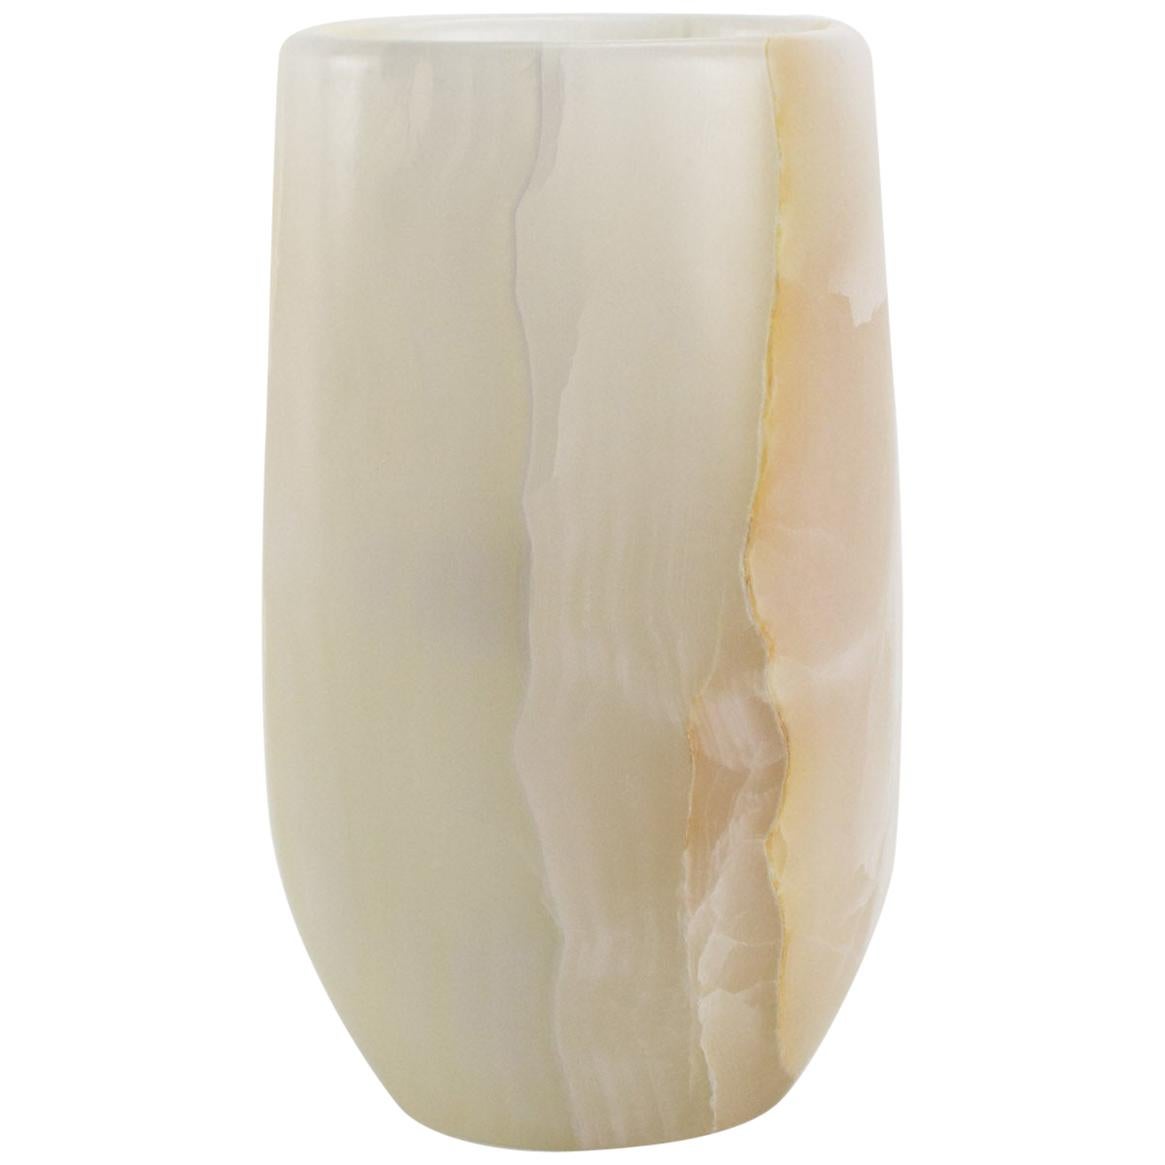 Vase Vessel Decorative Sculpture White Onyx Marble Hand-carved Italy  For Sale